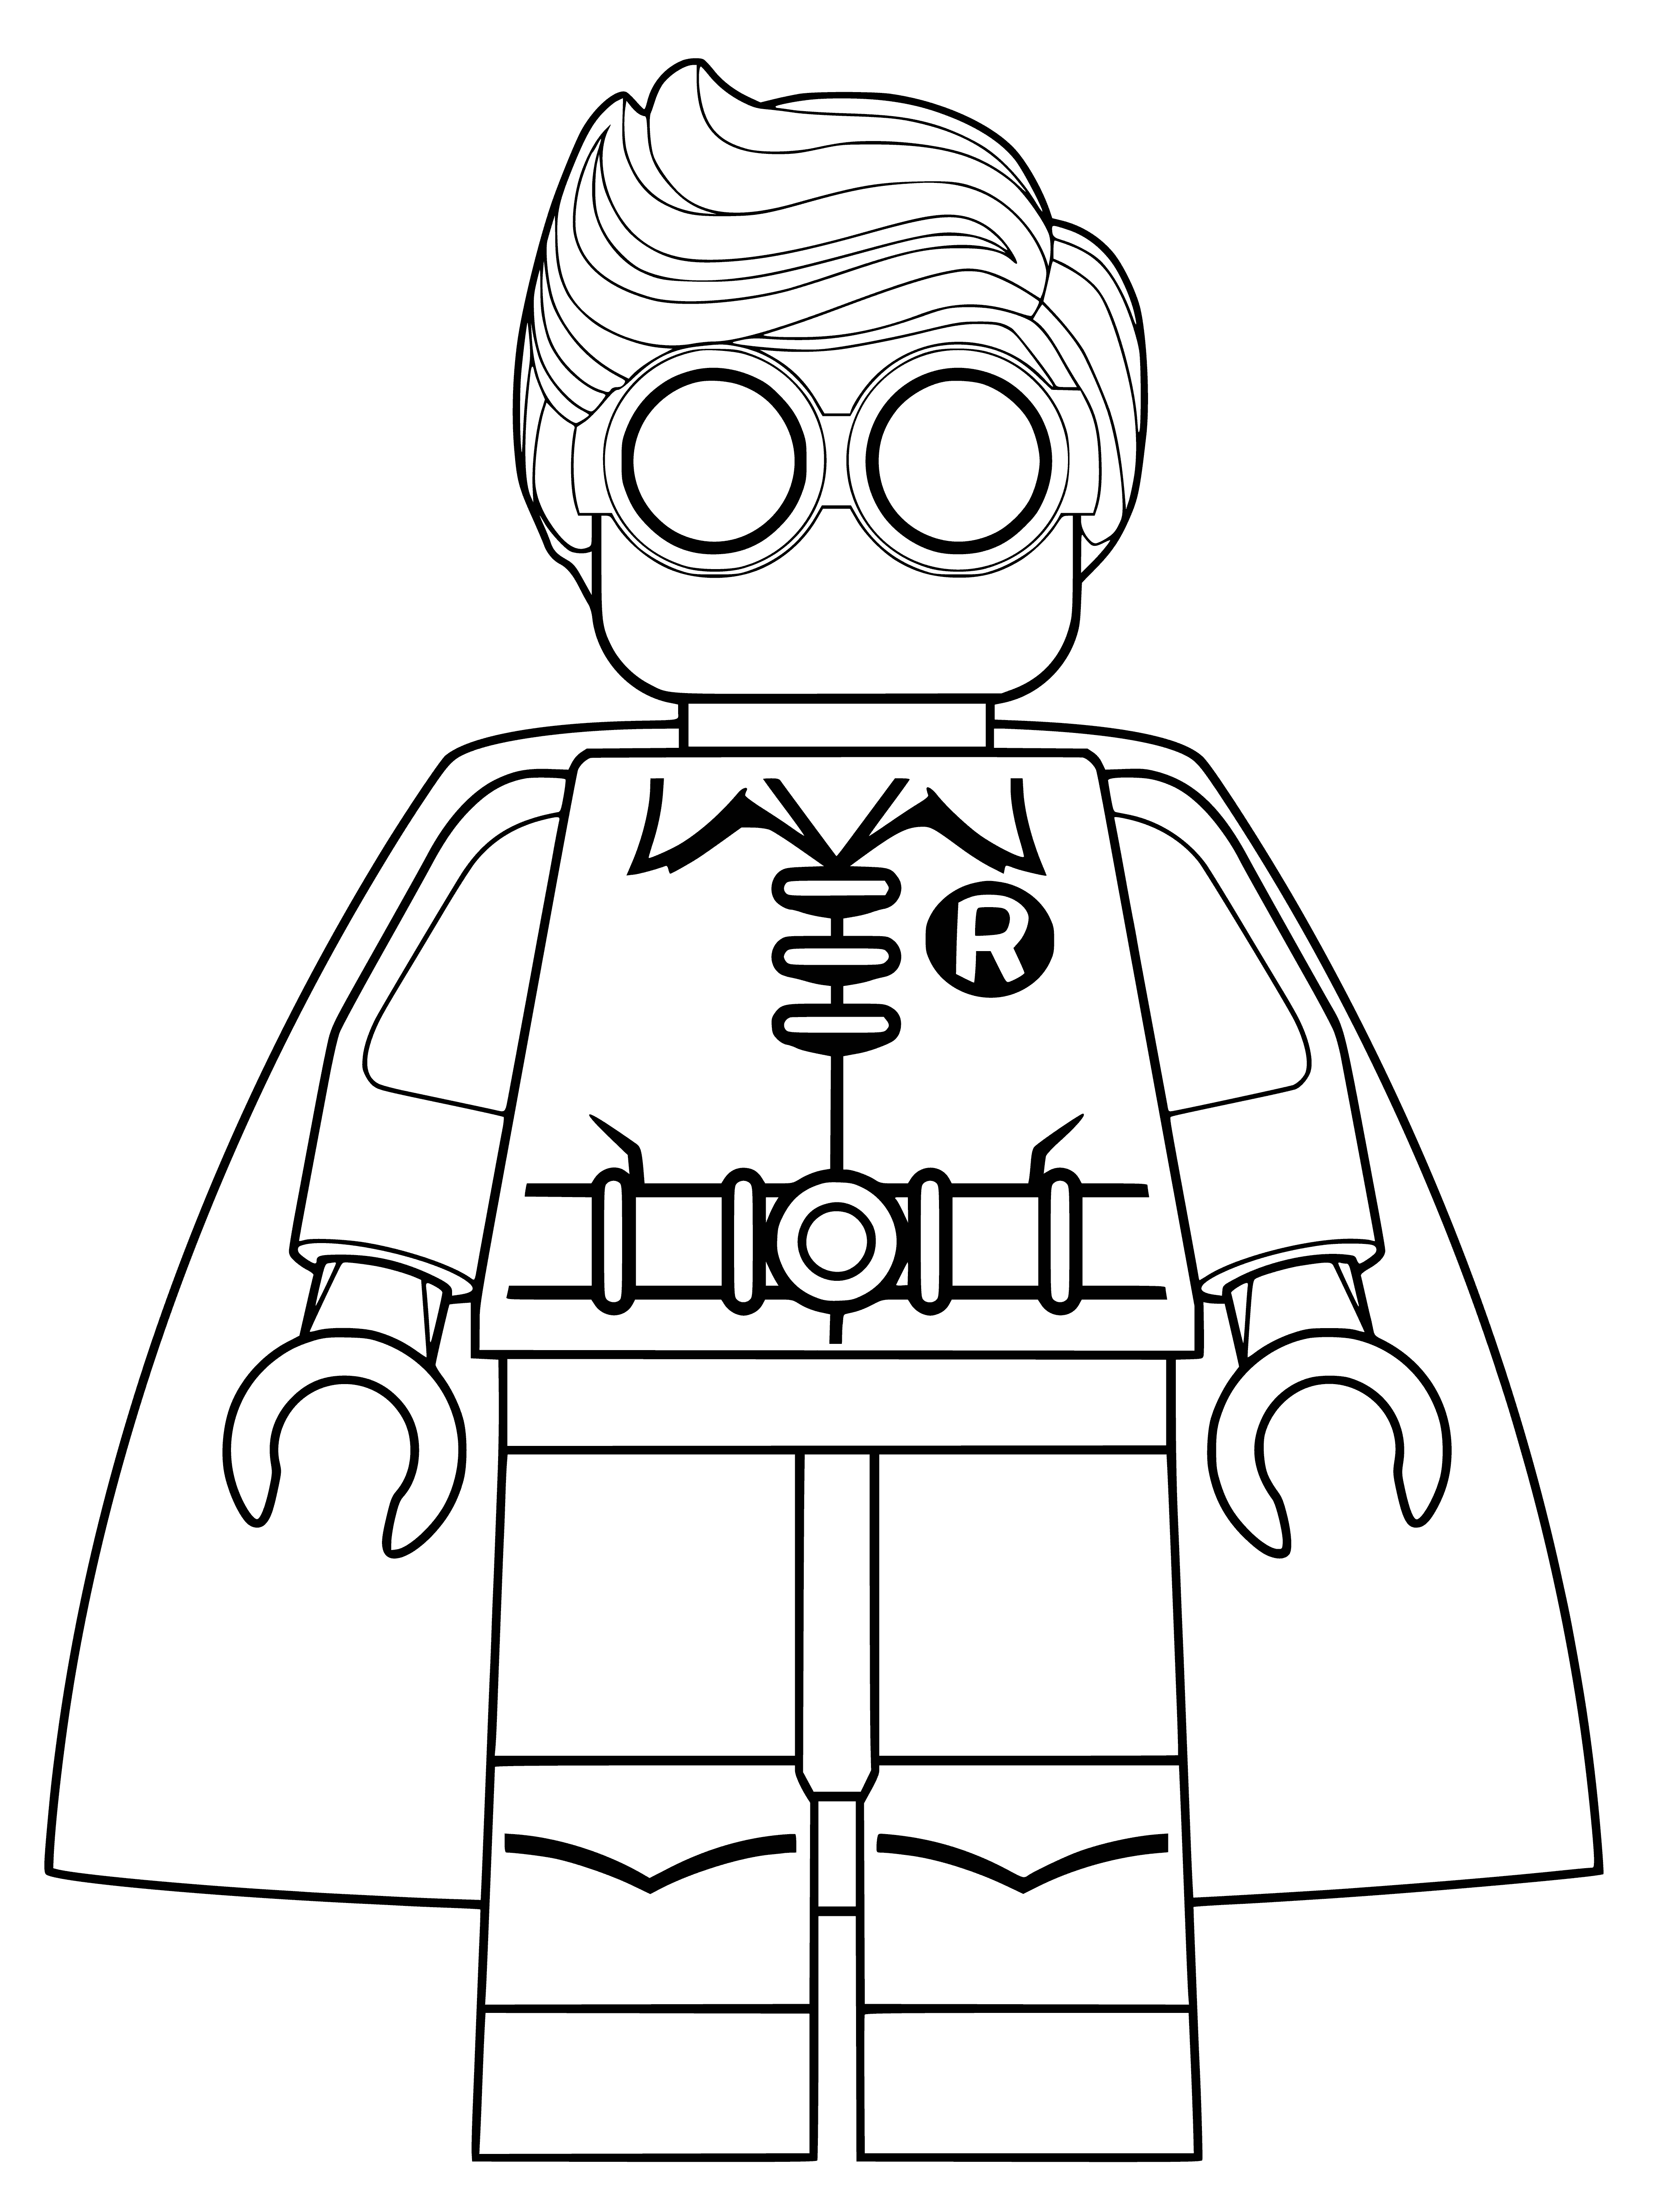 coloring page: LEGO minifigures of Batman and Robin - he in grey & black, yellow belt & cape, yellow eyes & symbol / she in red & green, black belt & cape, green eyes & R.